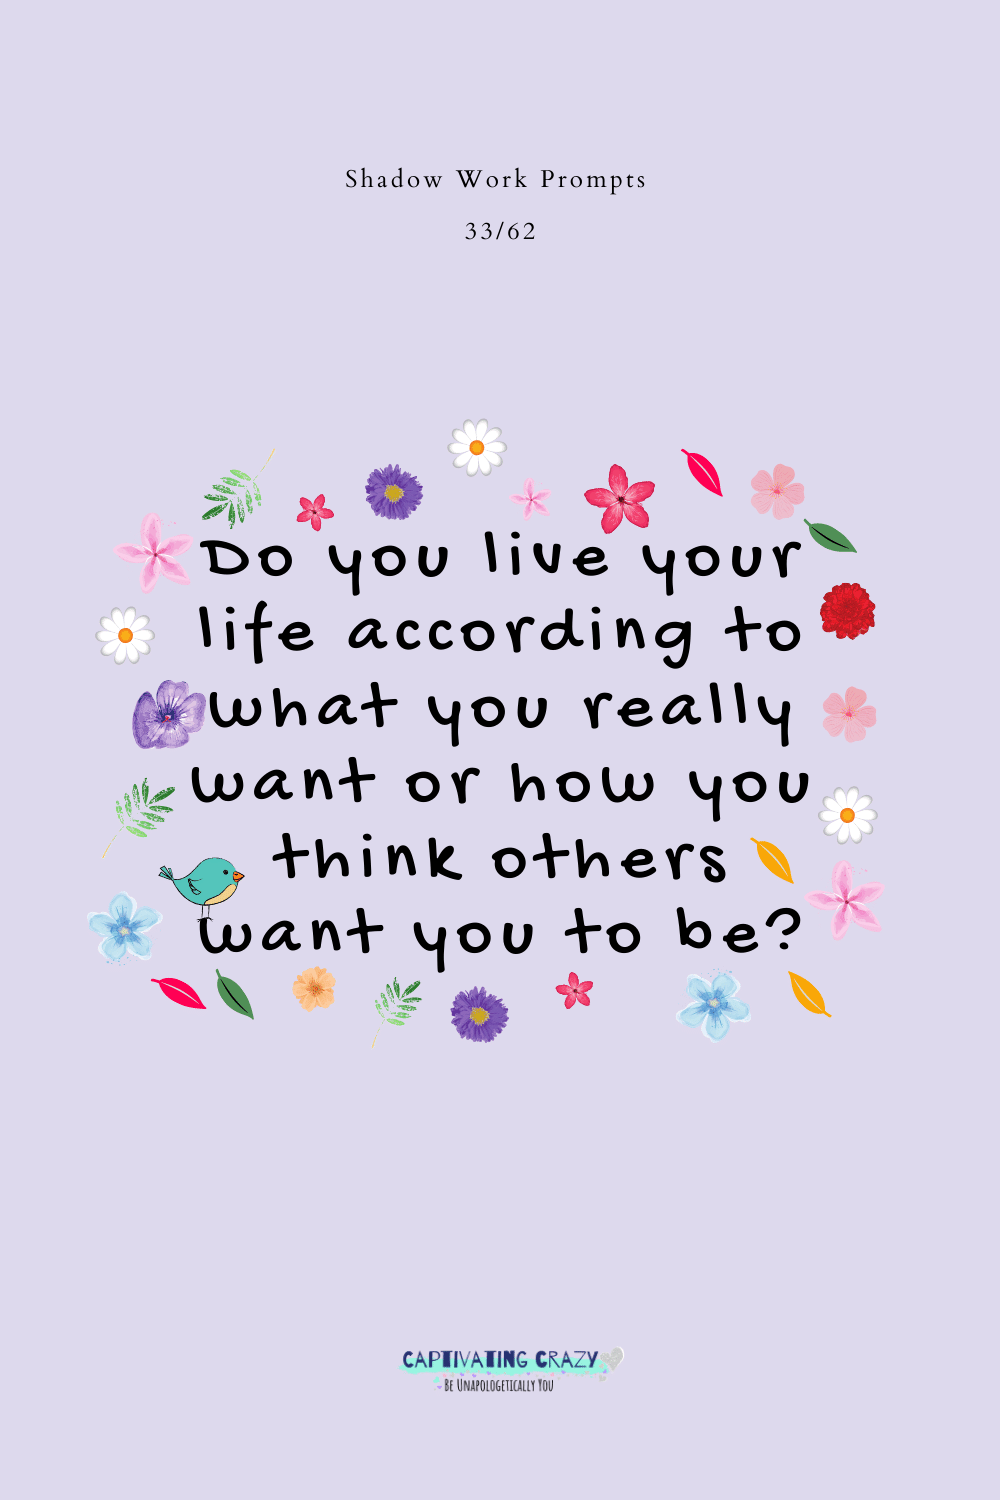 Do you live your life according to what you really want or how you think others want you to be?